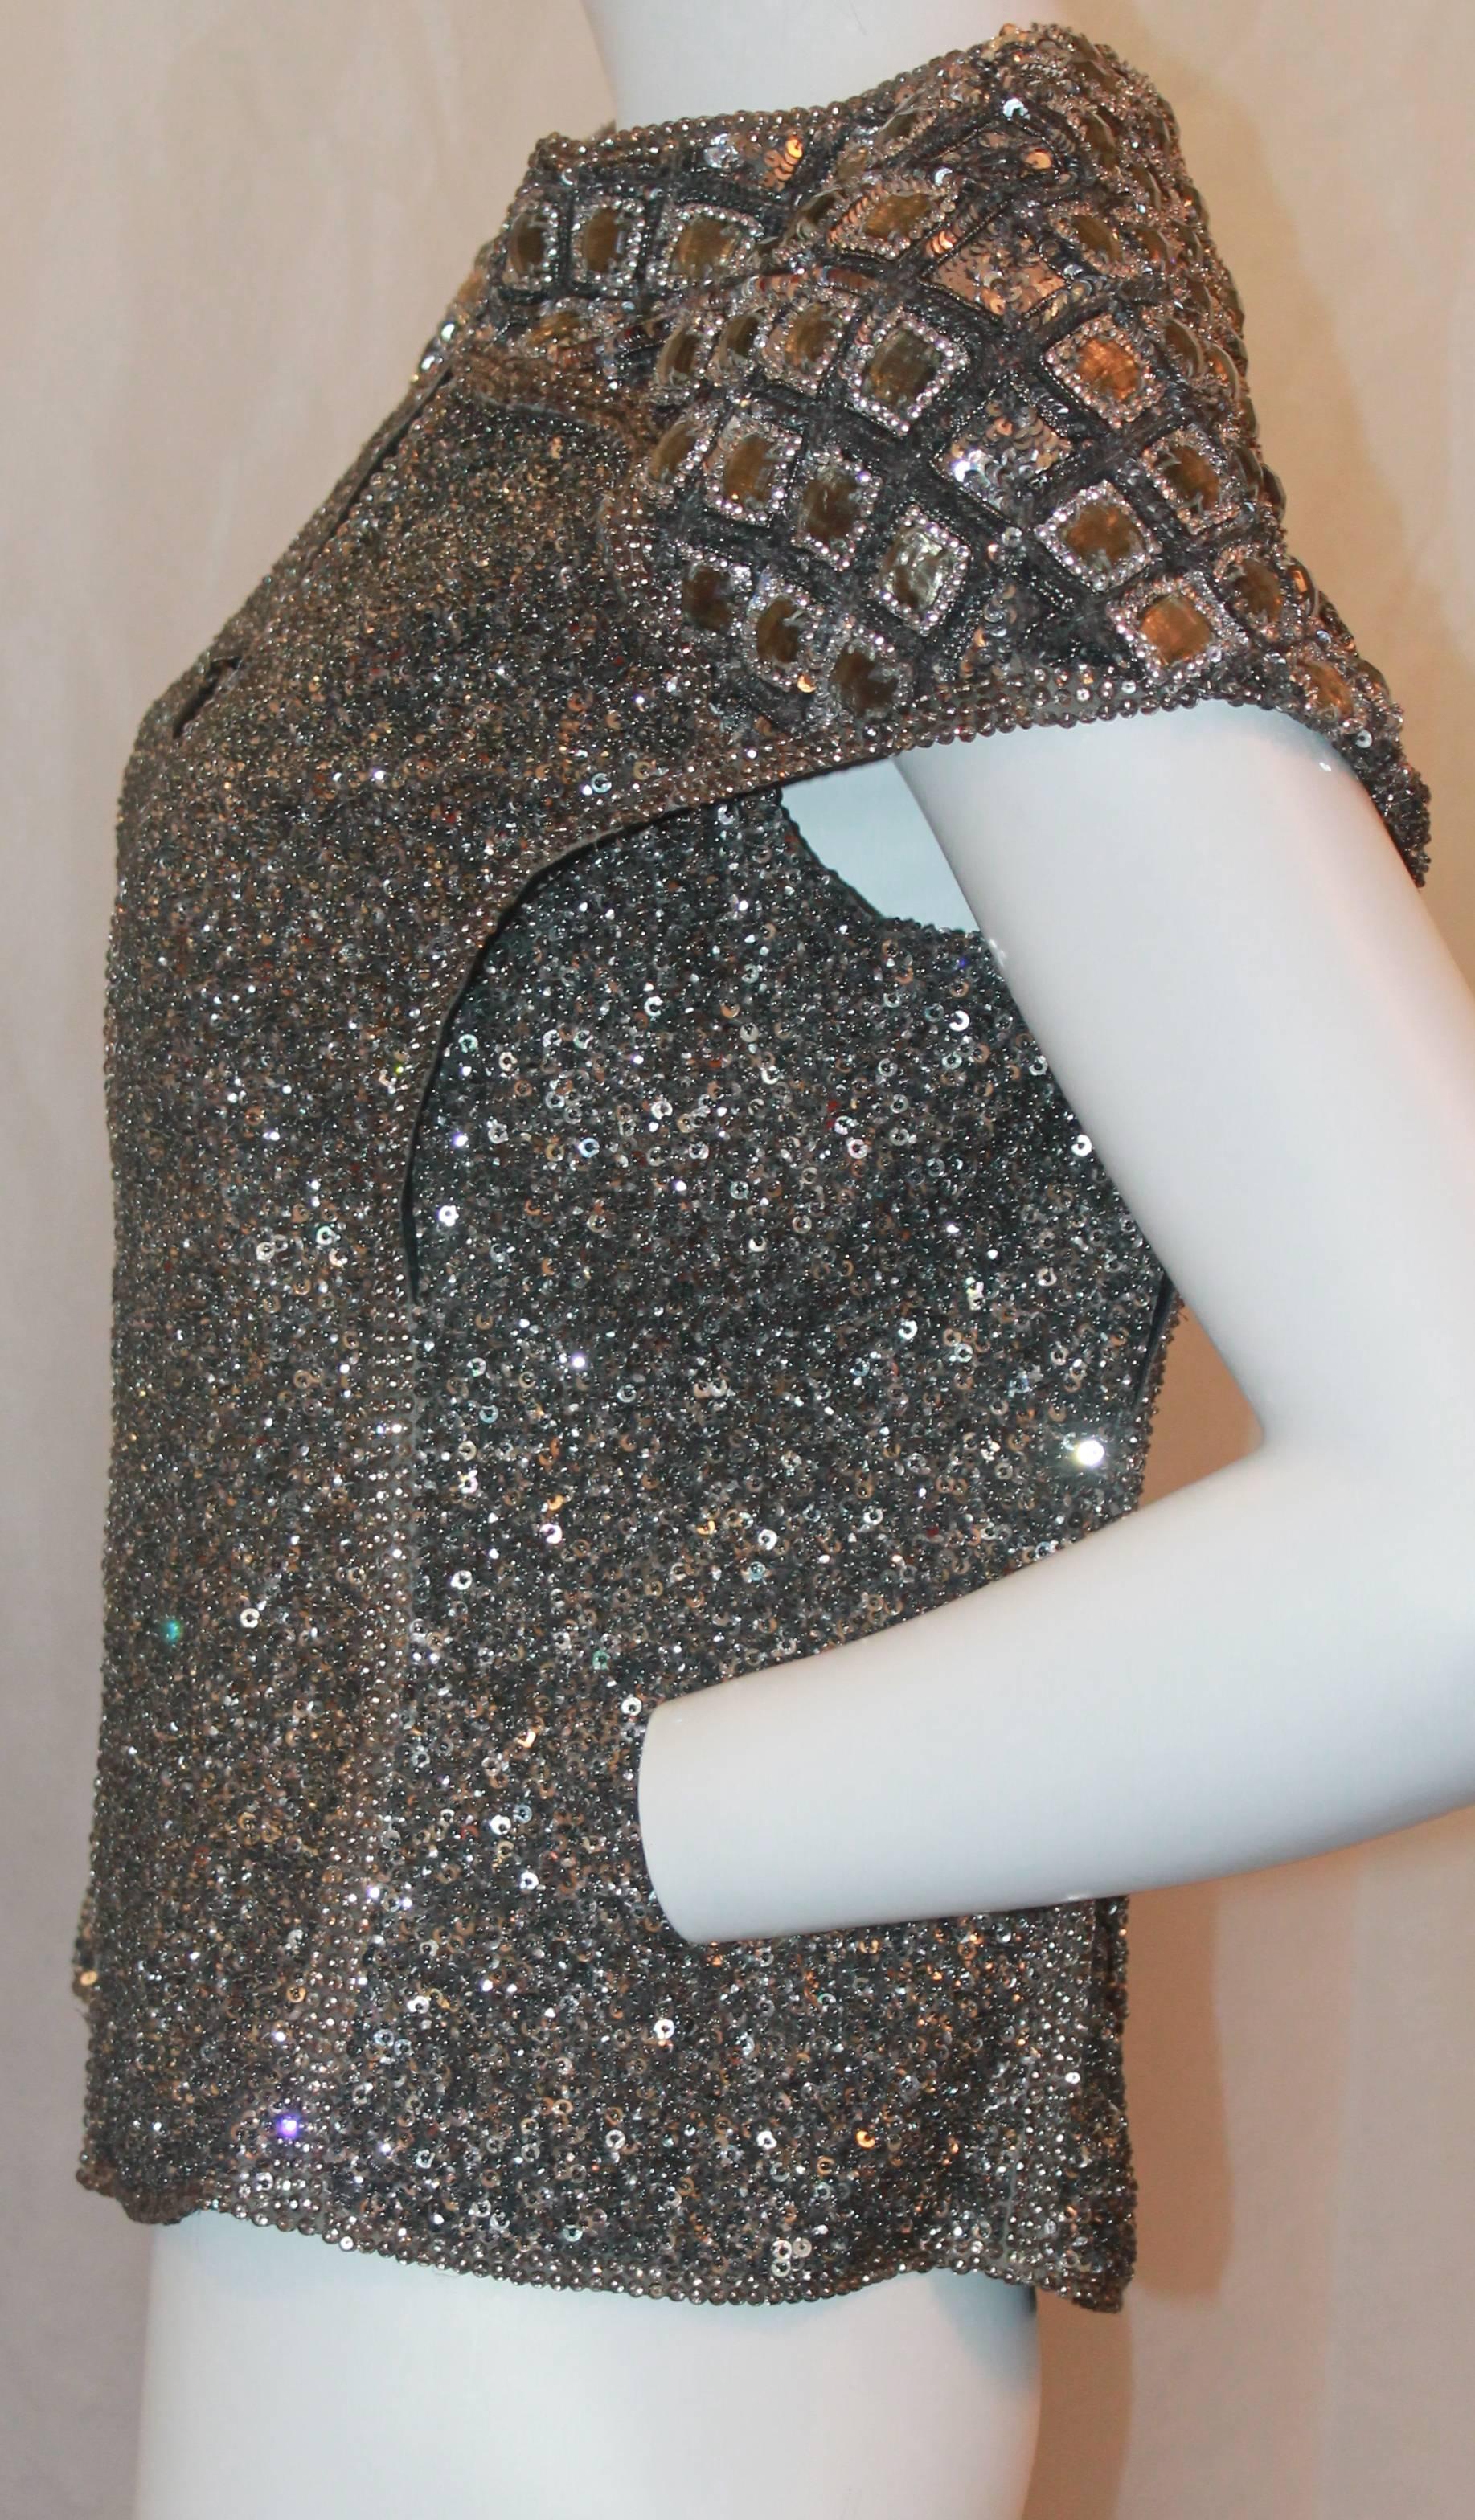 Escada Heavily Beaded gunmetal  Top w/ Satin Sash - 38 - NWT.  This stunning top is in excellent condition.  It is very heavily beaded with a front zipper down the center front.  It has a geometric cut with two front panels.  This top includes a